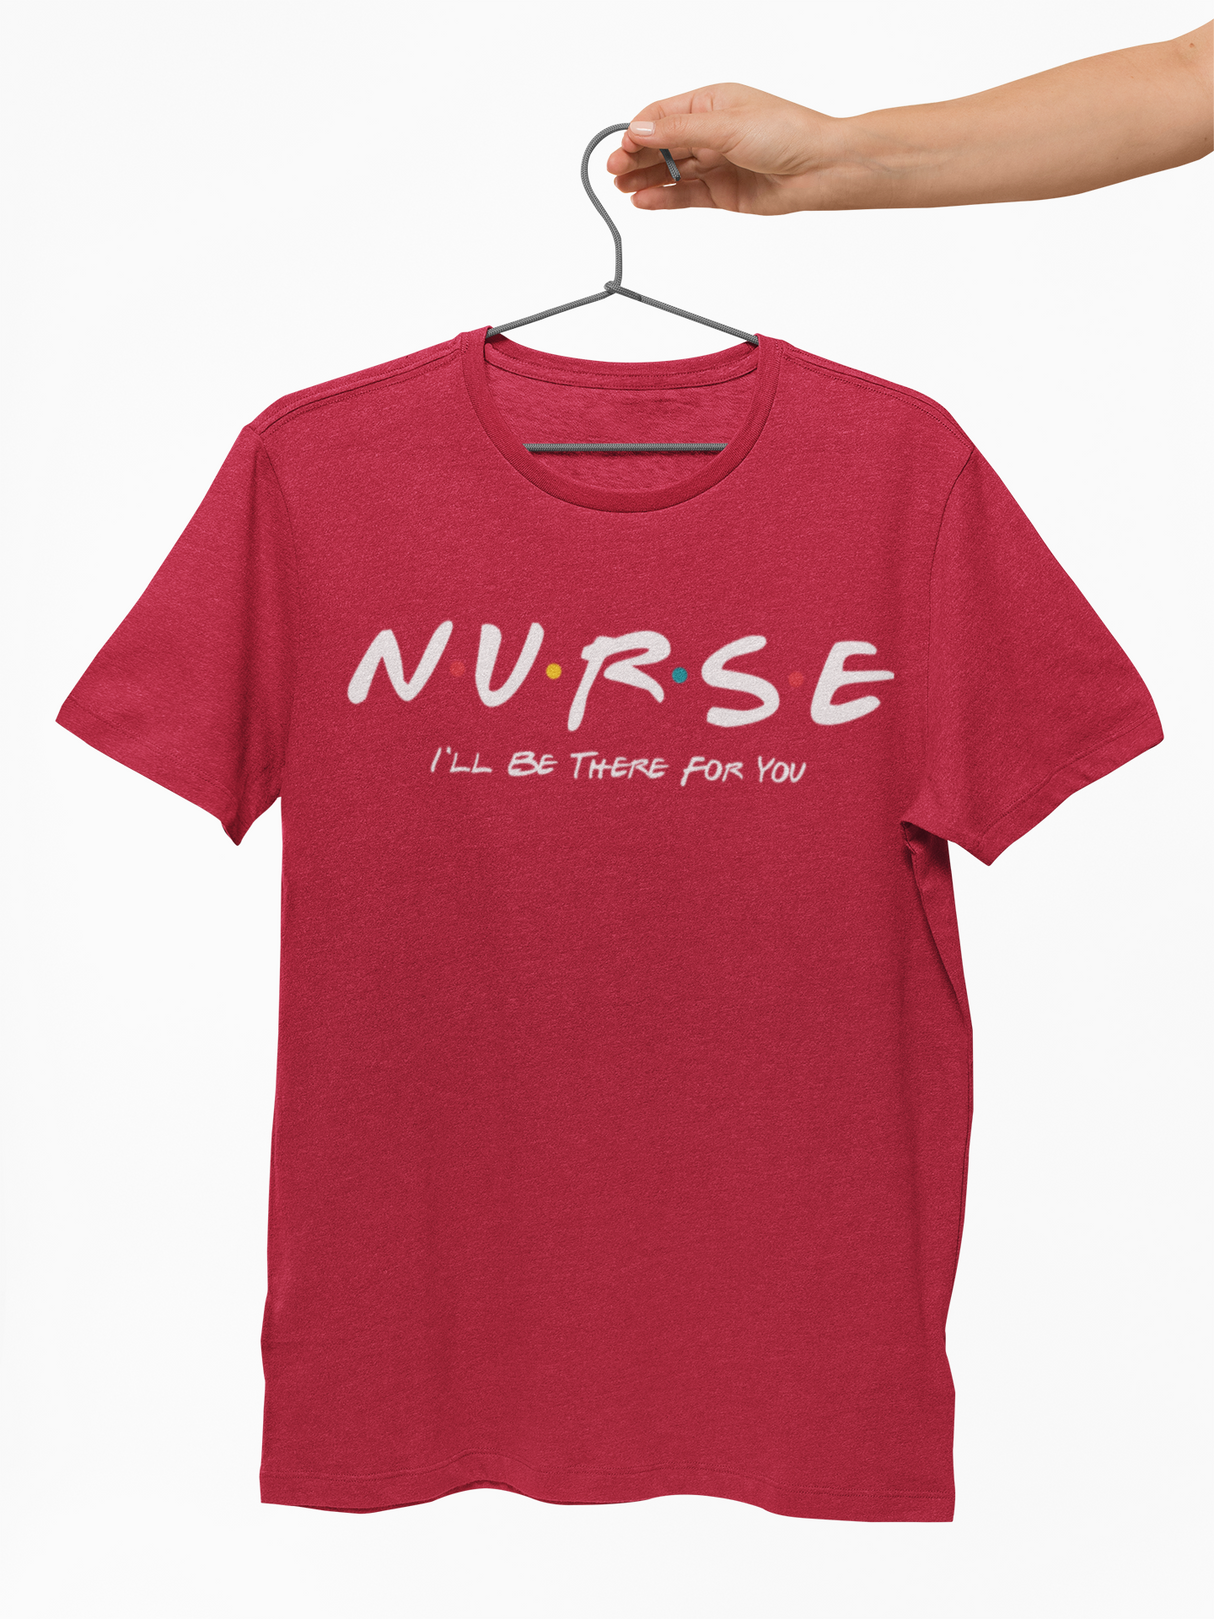 NURSE I'll Be There For You Tee